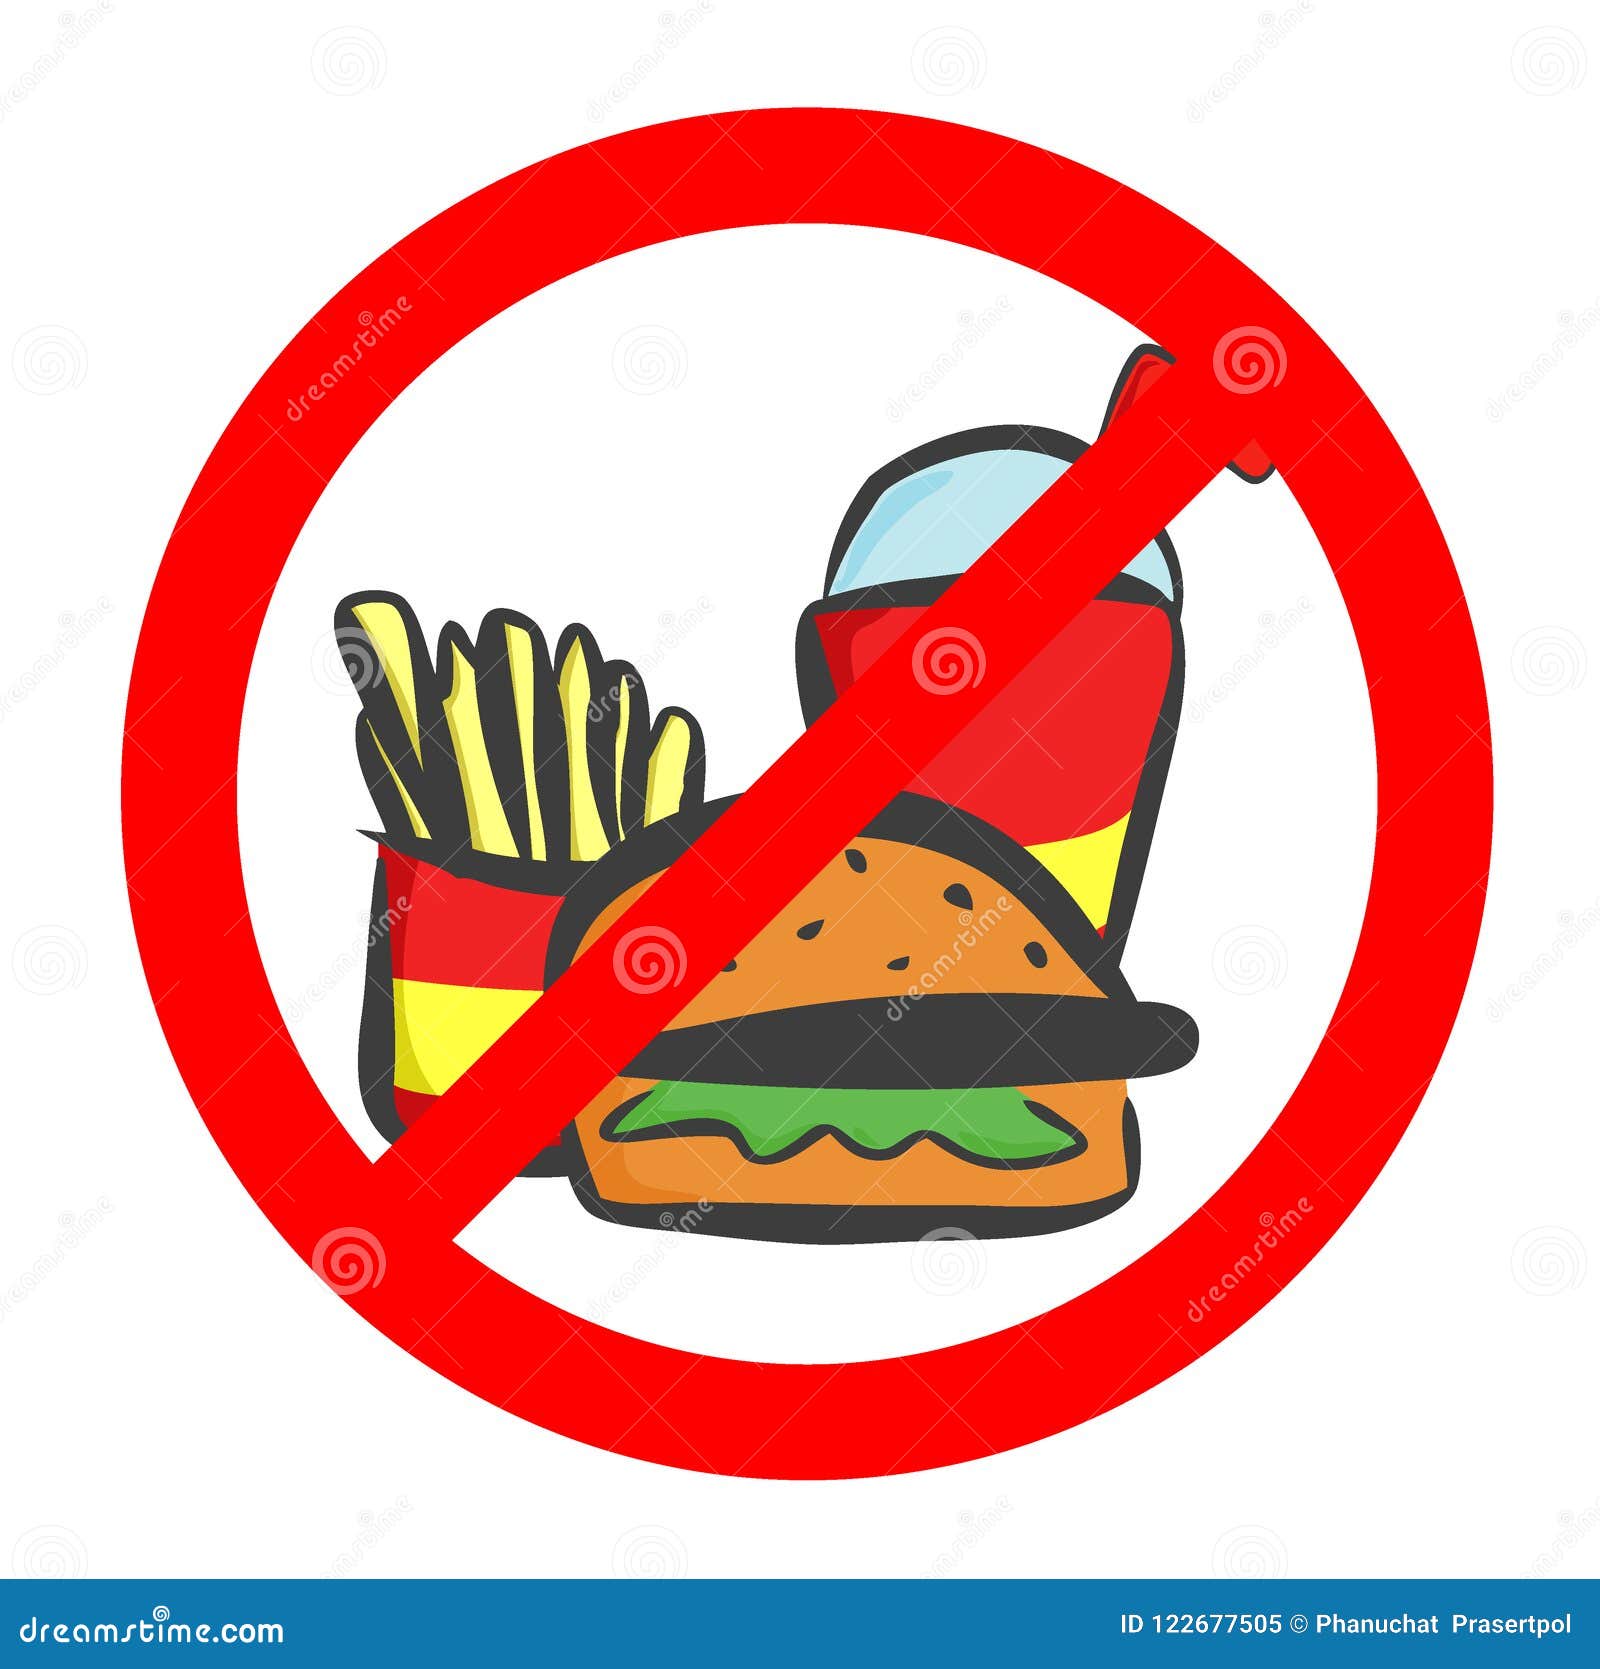 do not eat and drink . no eating or drinking, prohibition sign. .